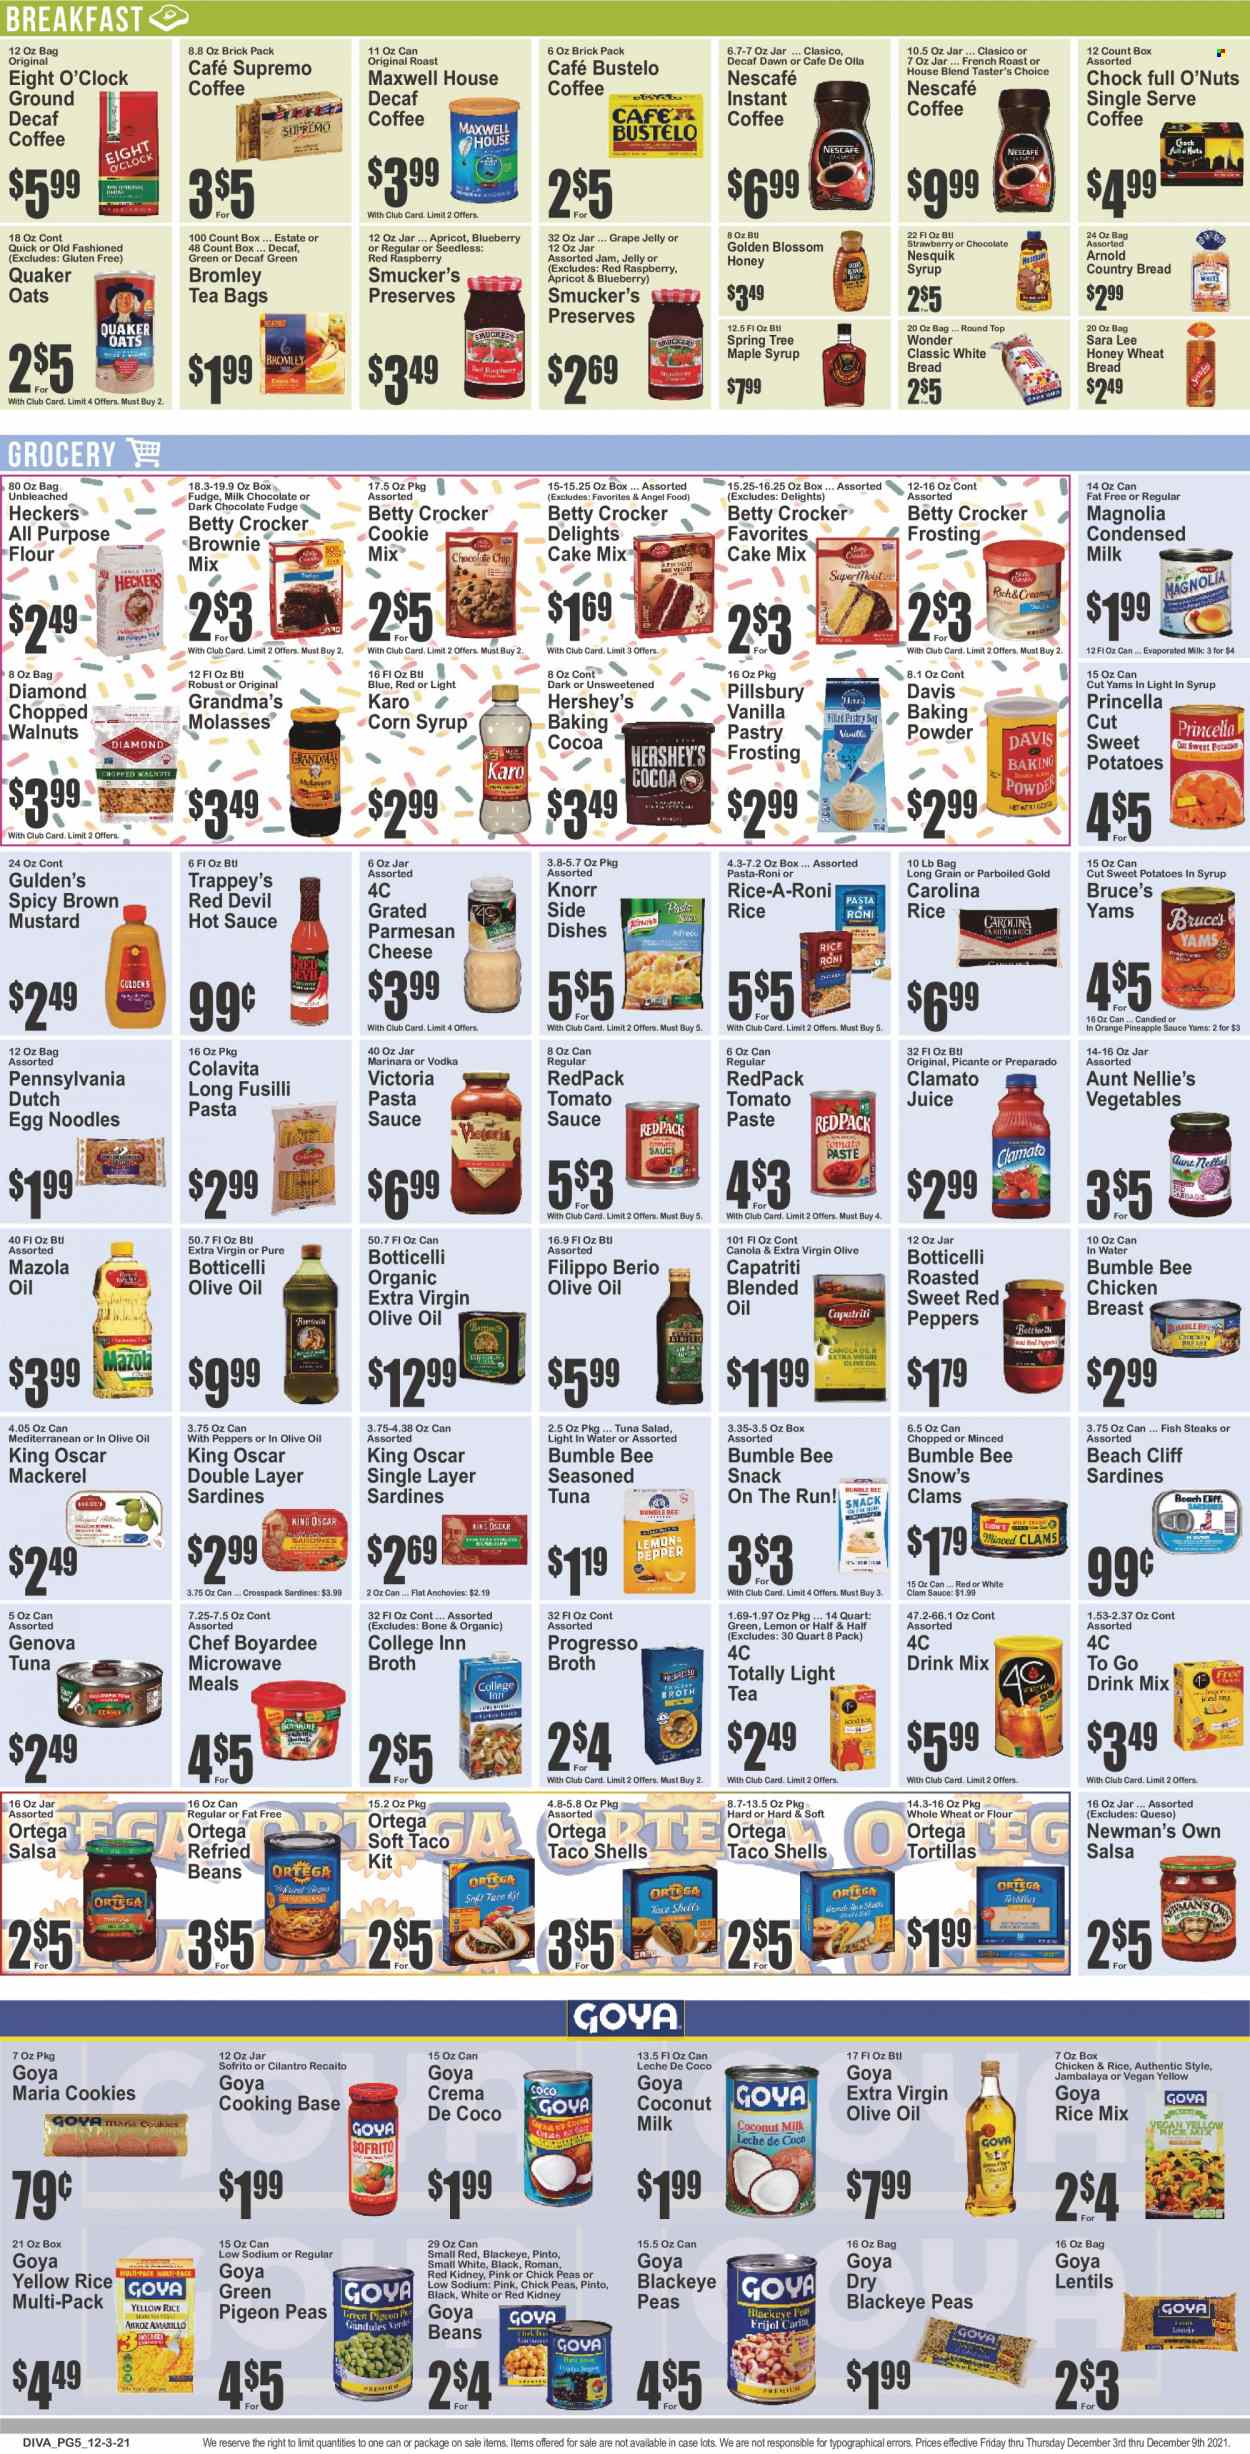 thumbnail - Key Food Flyer - 12/03/2021 - 12/09/2021 - Sales products - bread, tortillas, wheat bread, tacos, Sara Lee, flour tortillas, Angel Food, brownie mix, cake mix, corn, sweet potato, potatoes, salad, red peppers, mackerel, sardines, fish, fish steak, pasta sauce, Bumble Bee, Knorr, sauce, Pillsbury, Quaker, noodles, Progresso, pasta sides, ready meal, rice sides, tuna salad, parmesan, cheese, grated cheese, jelly, Nesquik, evaporated milk, condensed milk, Hershey's, milk chocolate, chocolate chips, all purpose flour, baking powder, cocoa, frosting, oats, broth, baking mix, anchovies, coconut milk, refried beans, tomato paste, tomato sauce, Goya, Chef Boyardee, canned fish, canned sweet potatoes, chickpeas, egg noodles, toor dal, fusilli, cilantro, mustard, hot sauce, salsa, extra virgin olive oil, olive oil, corn syrup, grape jelly, maple syrup, molasses, jam, walnuts, tomato juice, juice, Clamato, powder drink, Maxwell House, tea bags, coffee, instant coffee, Nescafé, Eight O'Clock, alcohol, vodka, Half and half, steak, Pigeon. Page 5.